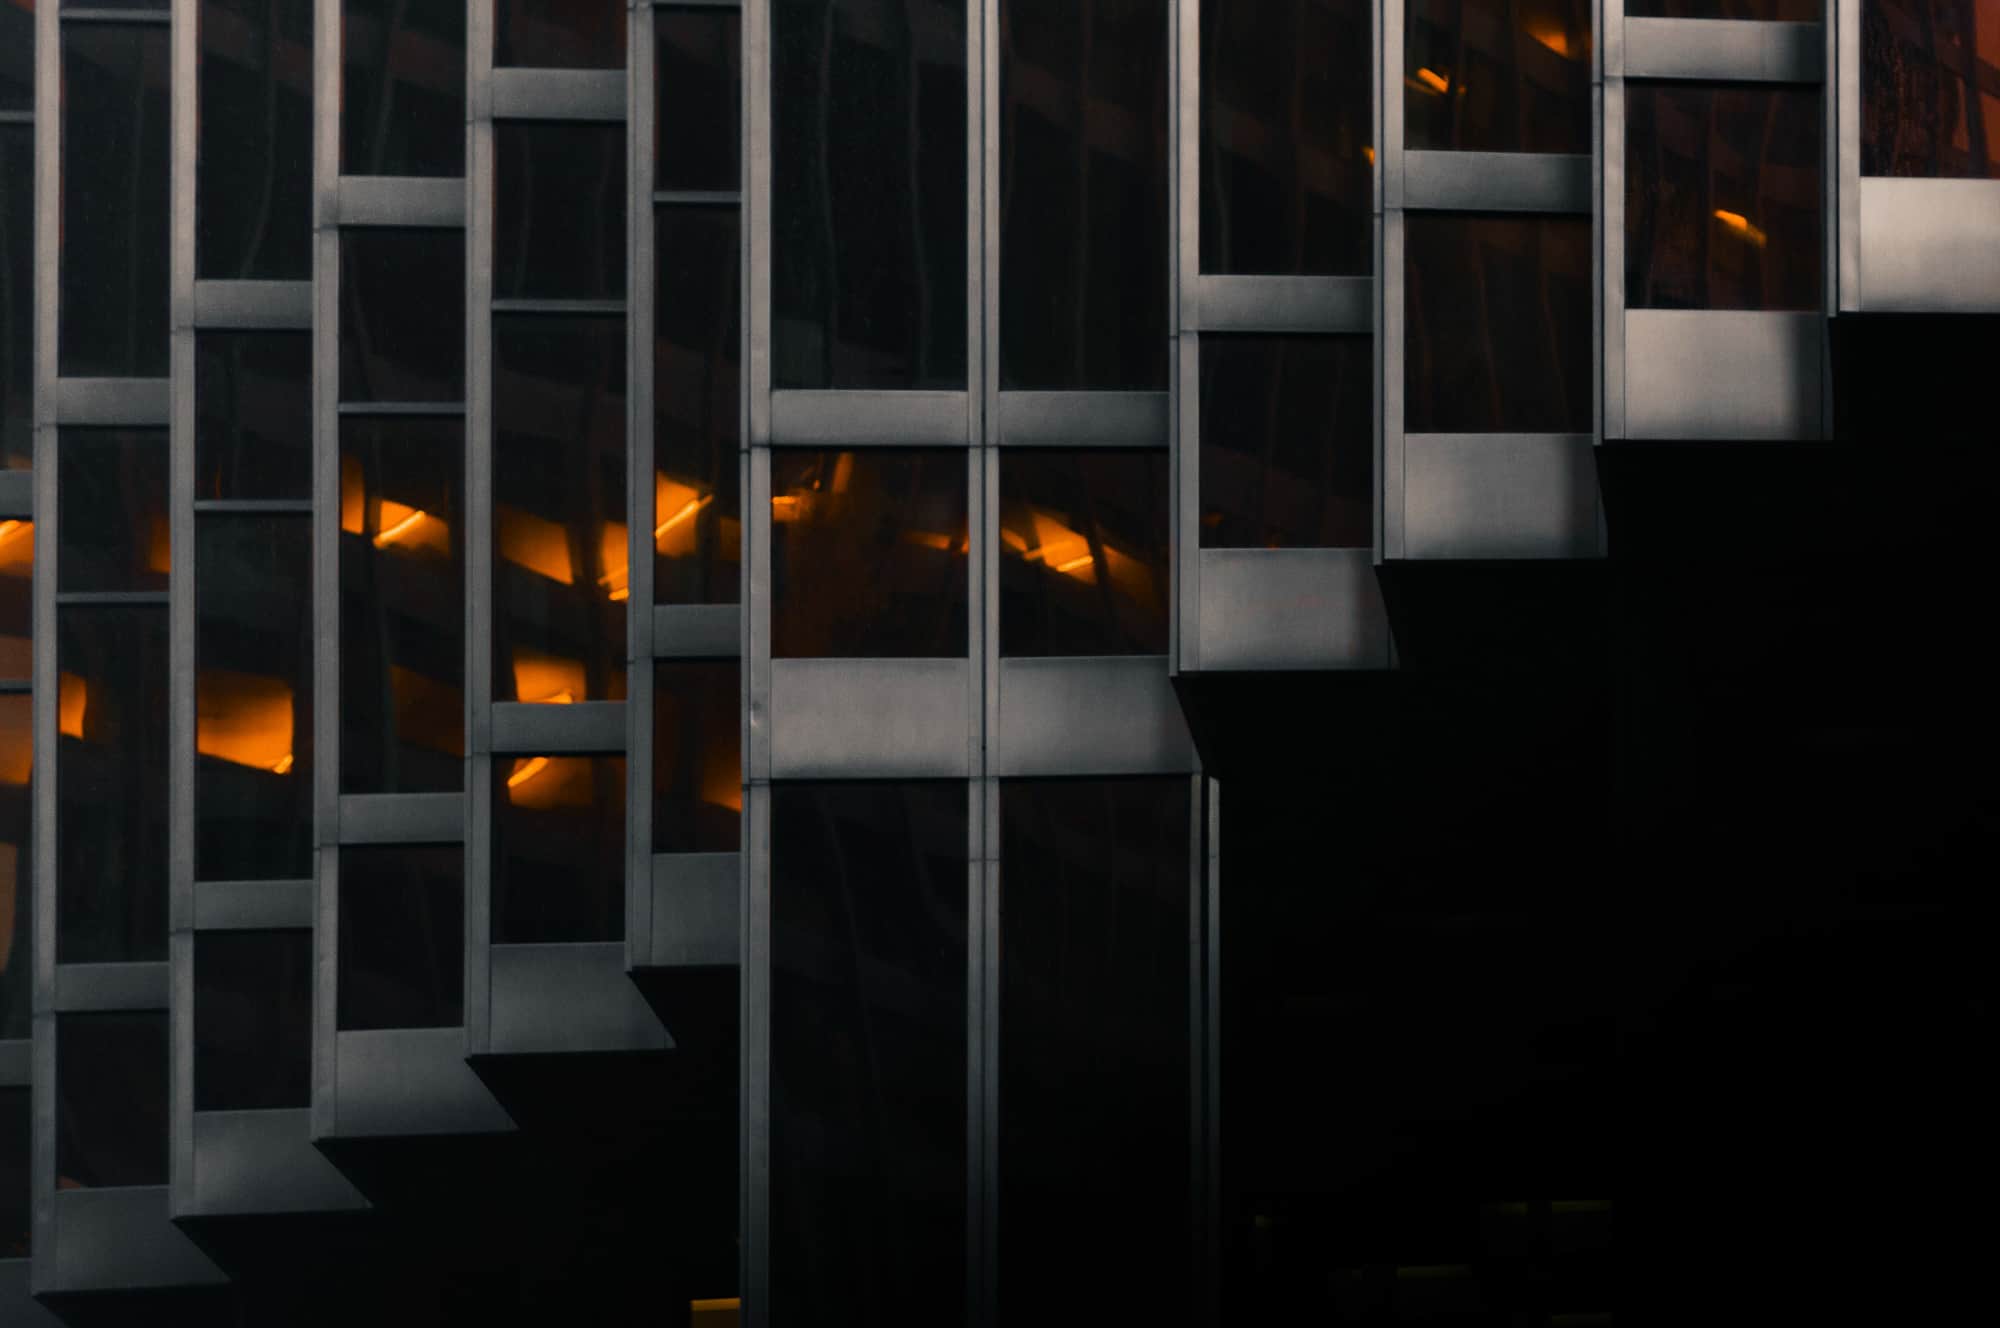 Abstract view of a modern building with geometric patterns and warm lights visible from within.